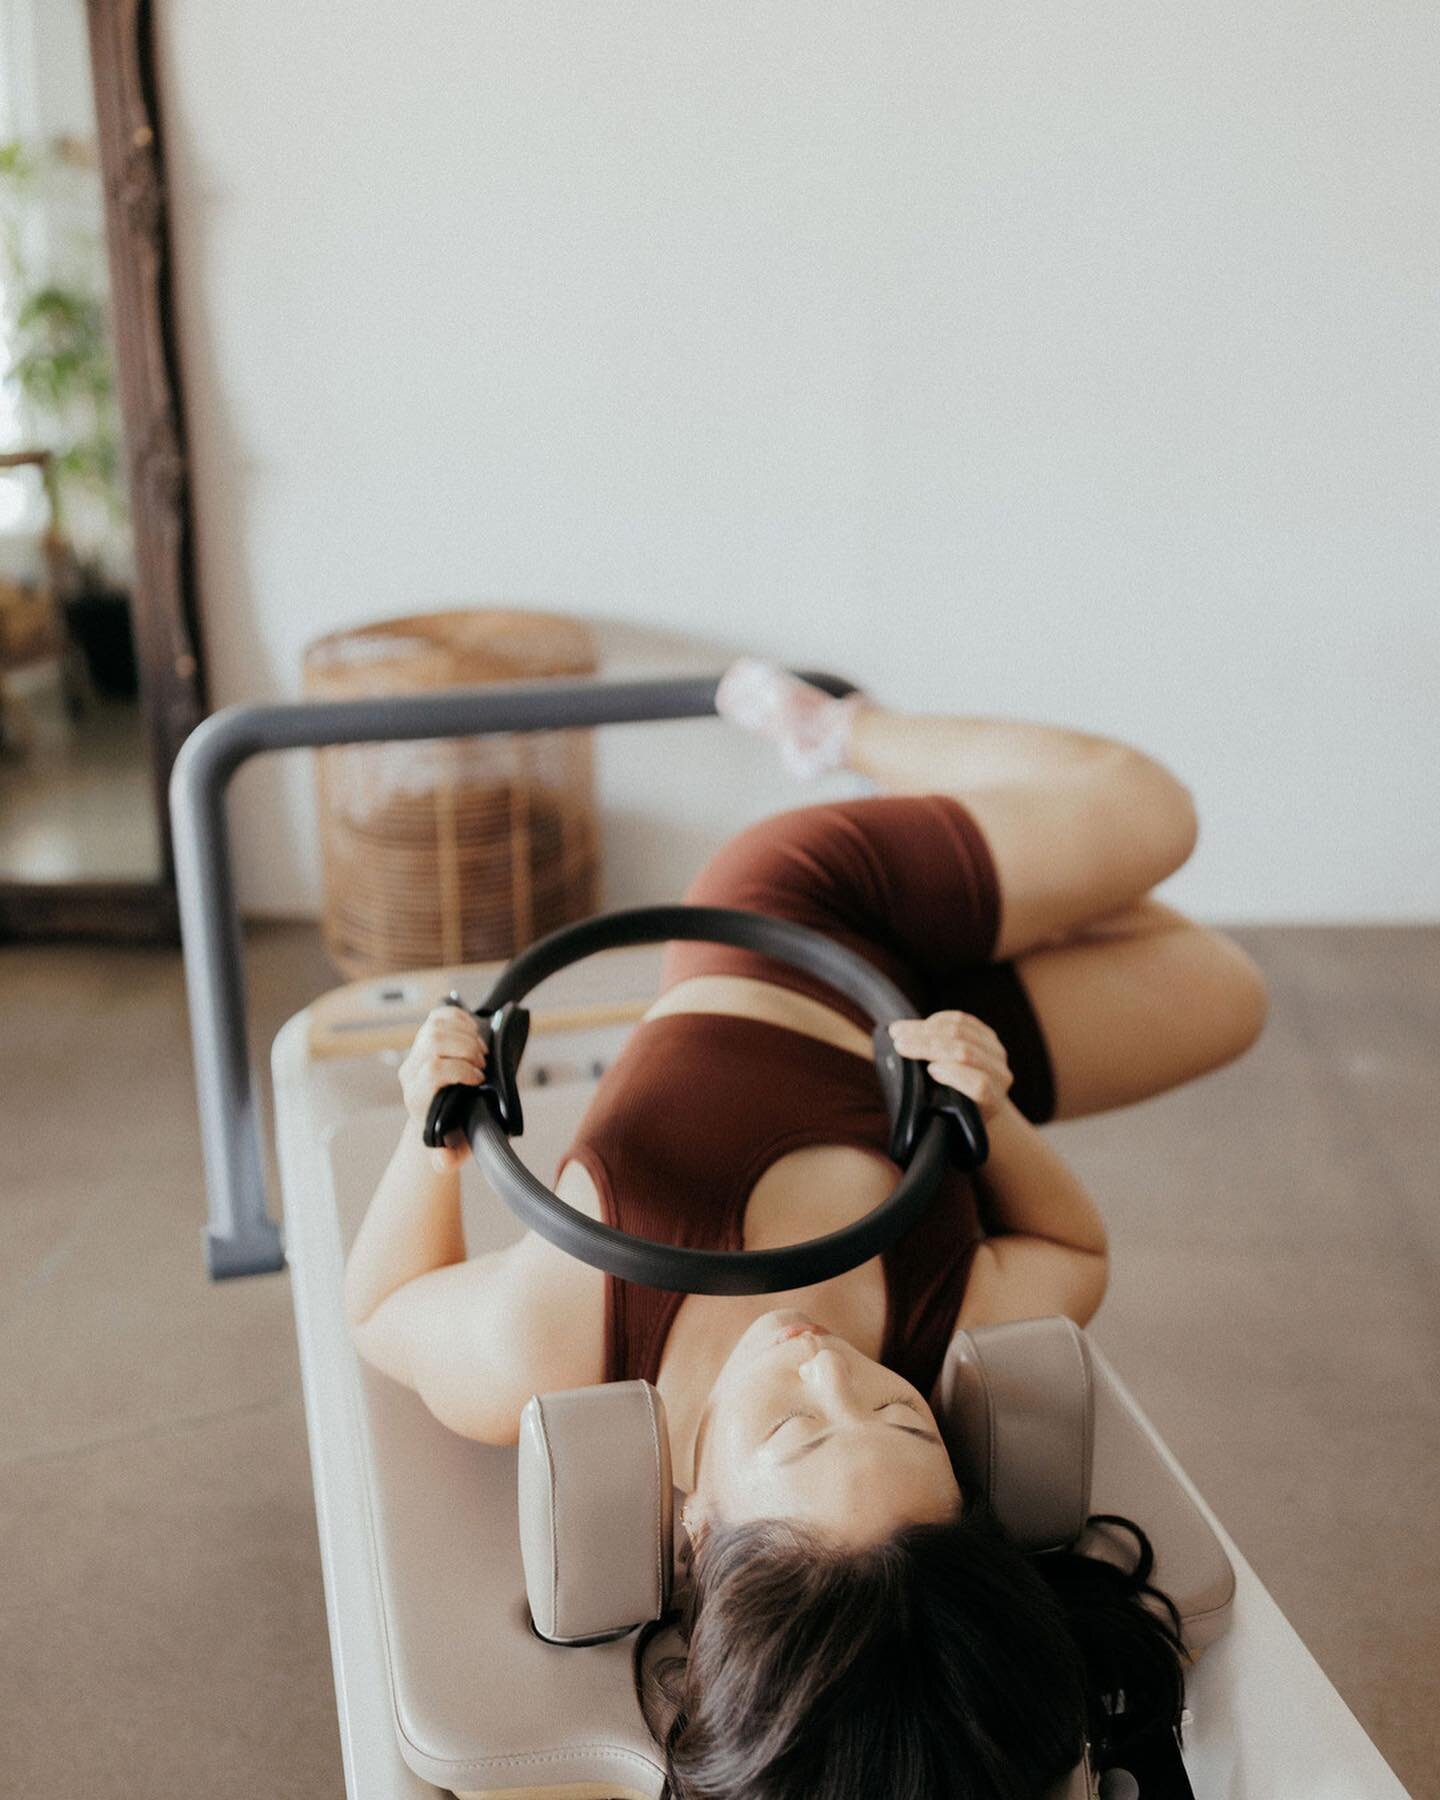 RESTORATIVE MOVEMENT 🕊️
(I want to feel: stretchy + stress-free)
⠀⠀⠀⠀⠀⠀⠀⠀⠀
Join us every Wed 3:30pm + Sun 10:20am
⠀⠀⠀⠀⠀⠀⠀⠀⠀
Awaken every muscle, improve range of motion, and ease tension in the body and mind. The Restorative Movement is ideal for pa